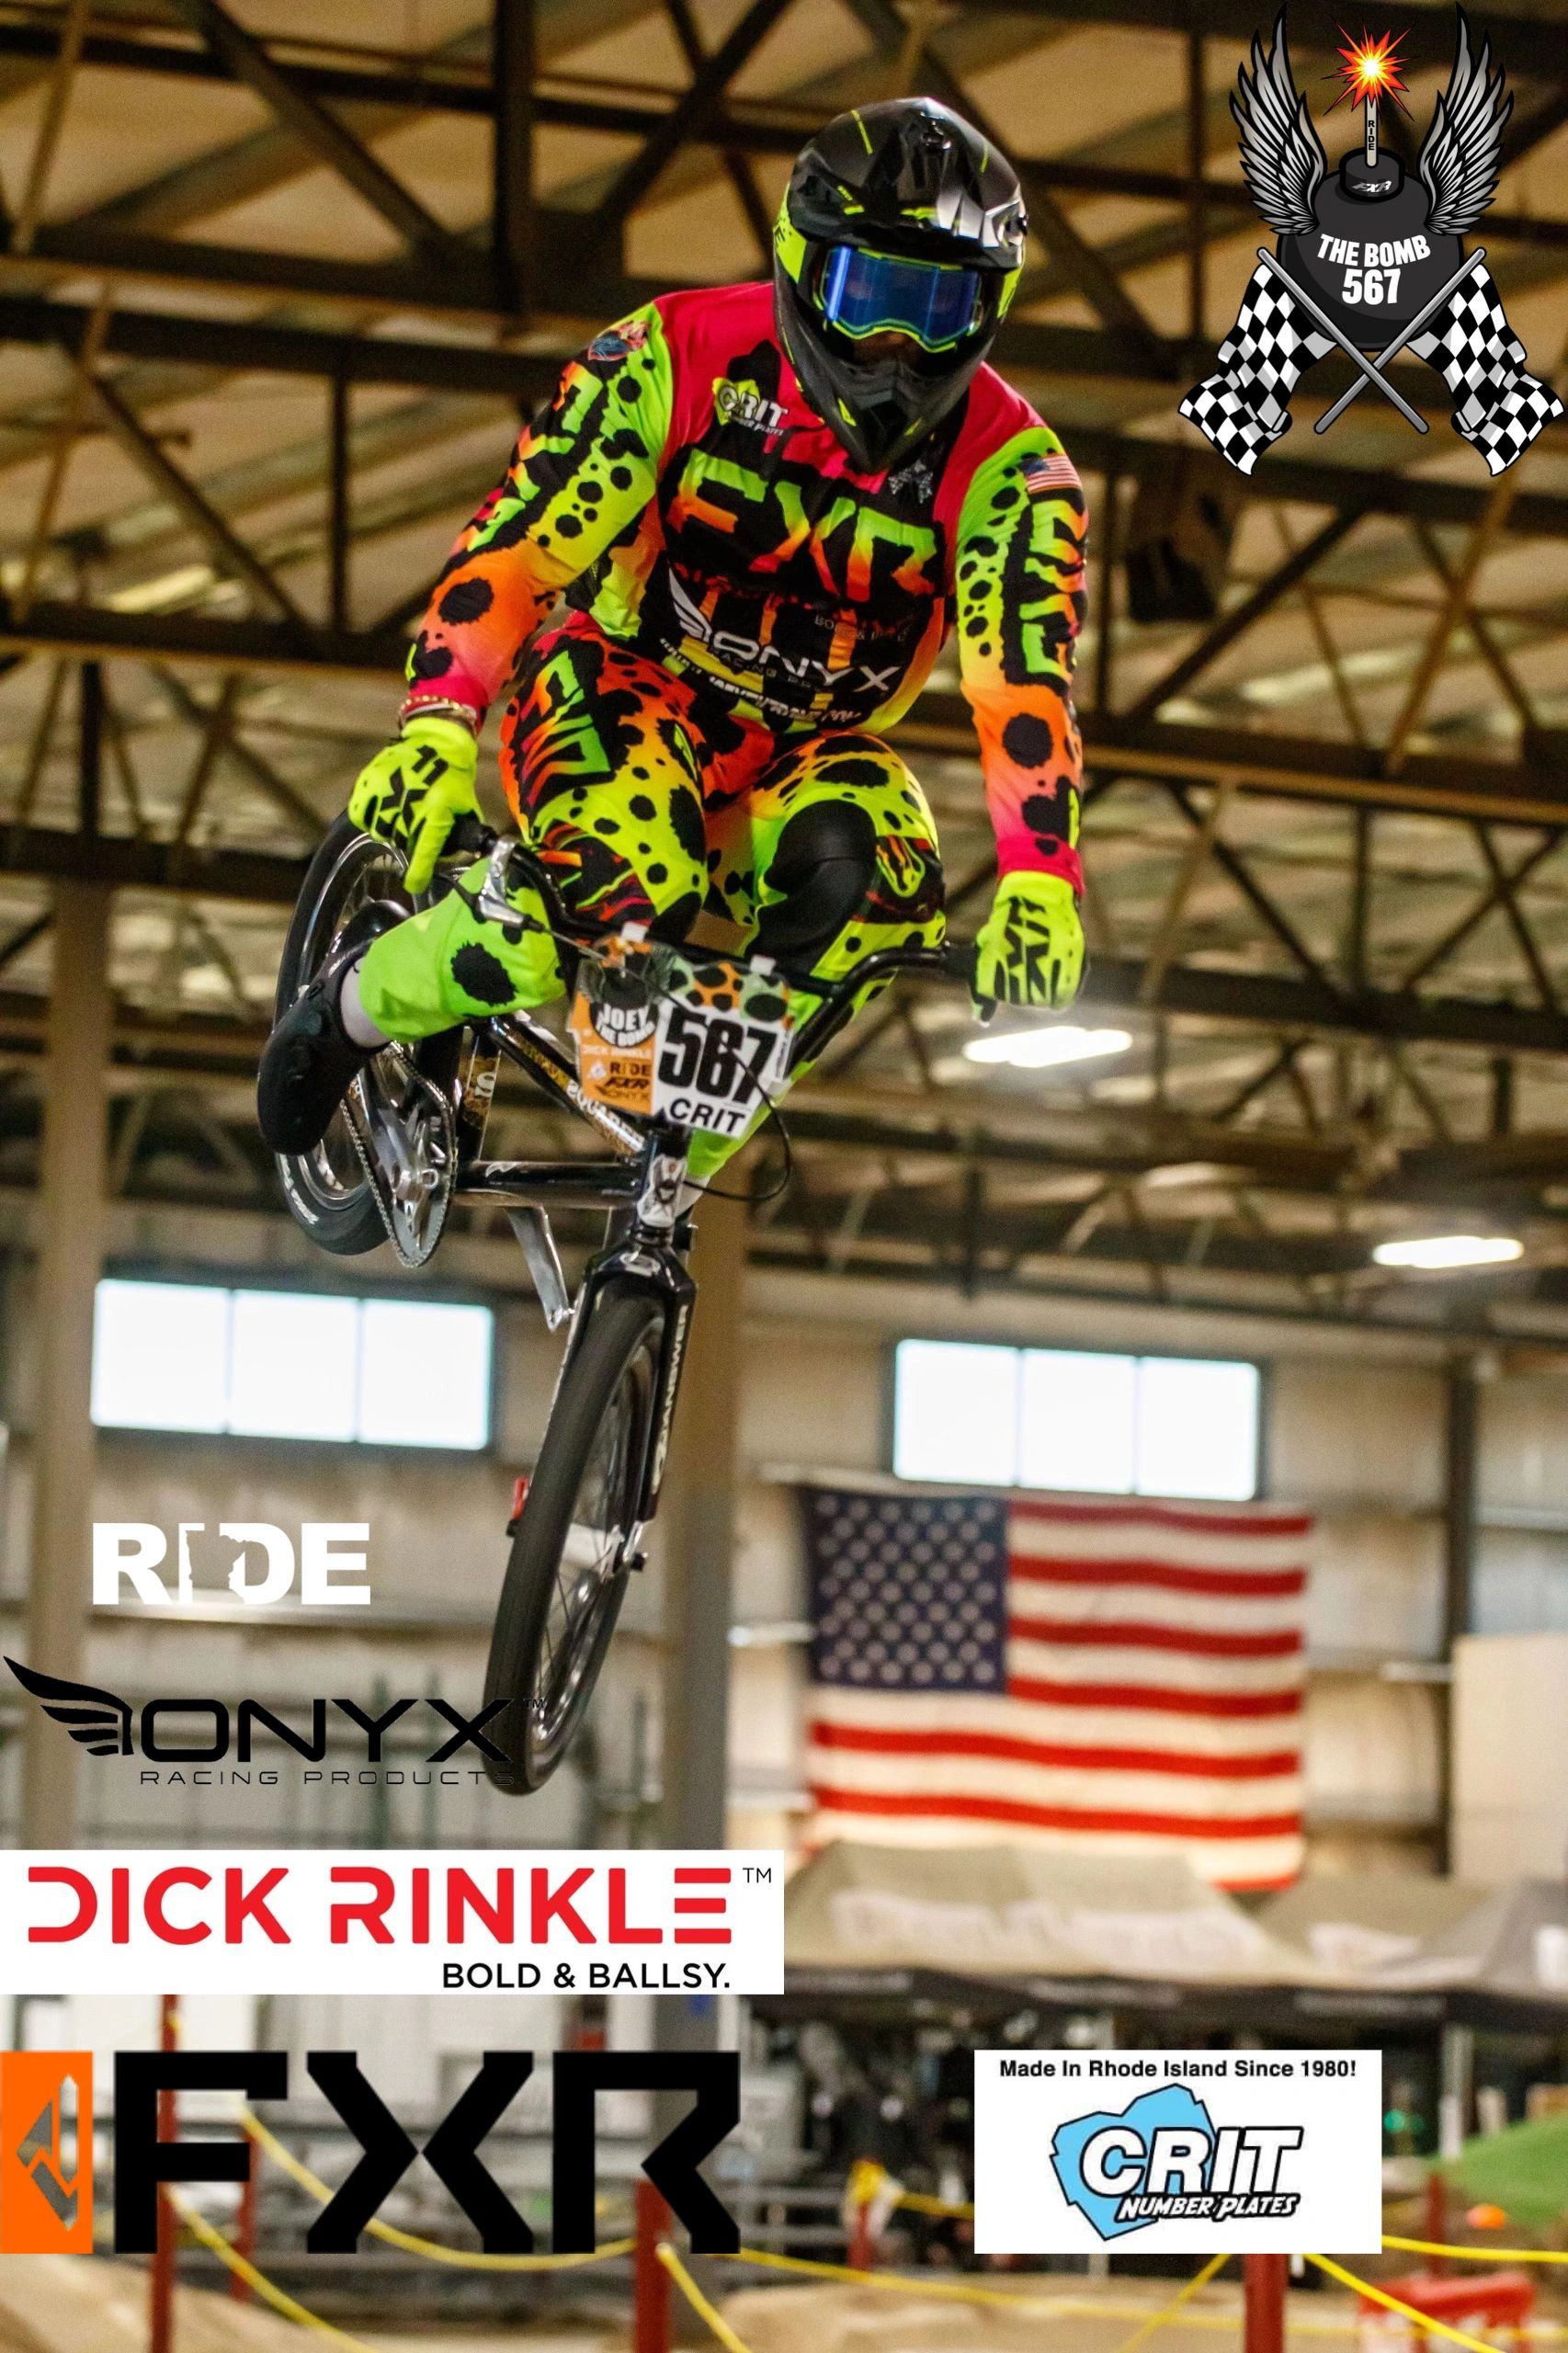 Joey the bomb displaying new fxr gear for the USA BMX national pro series. 